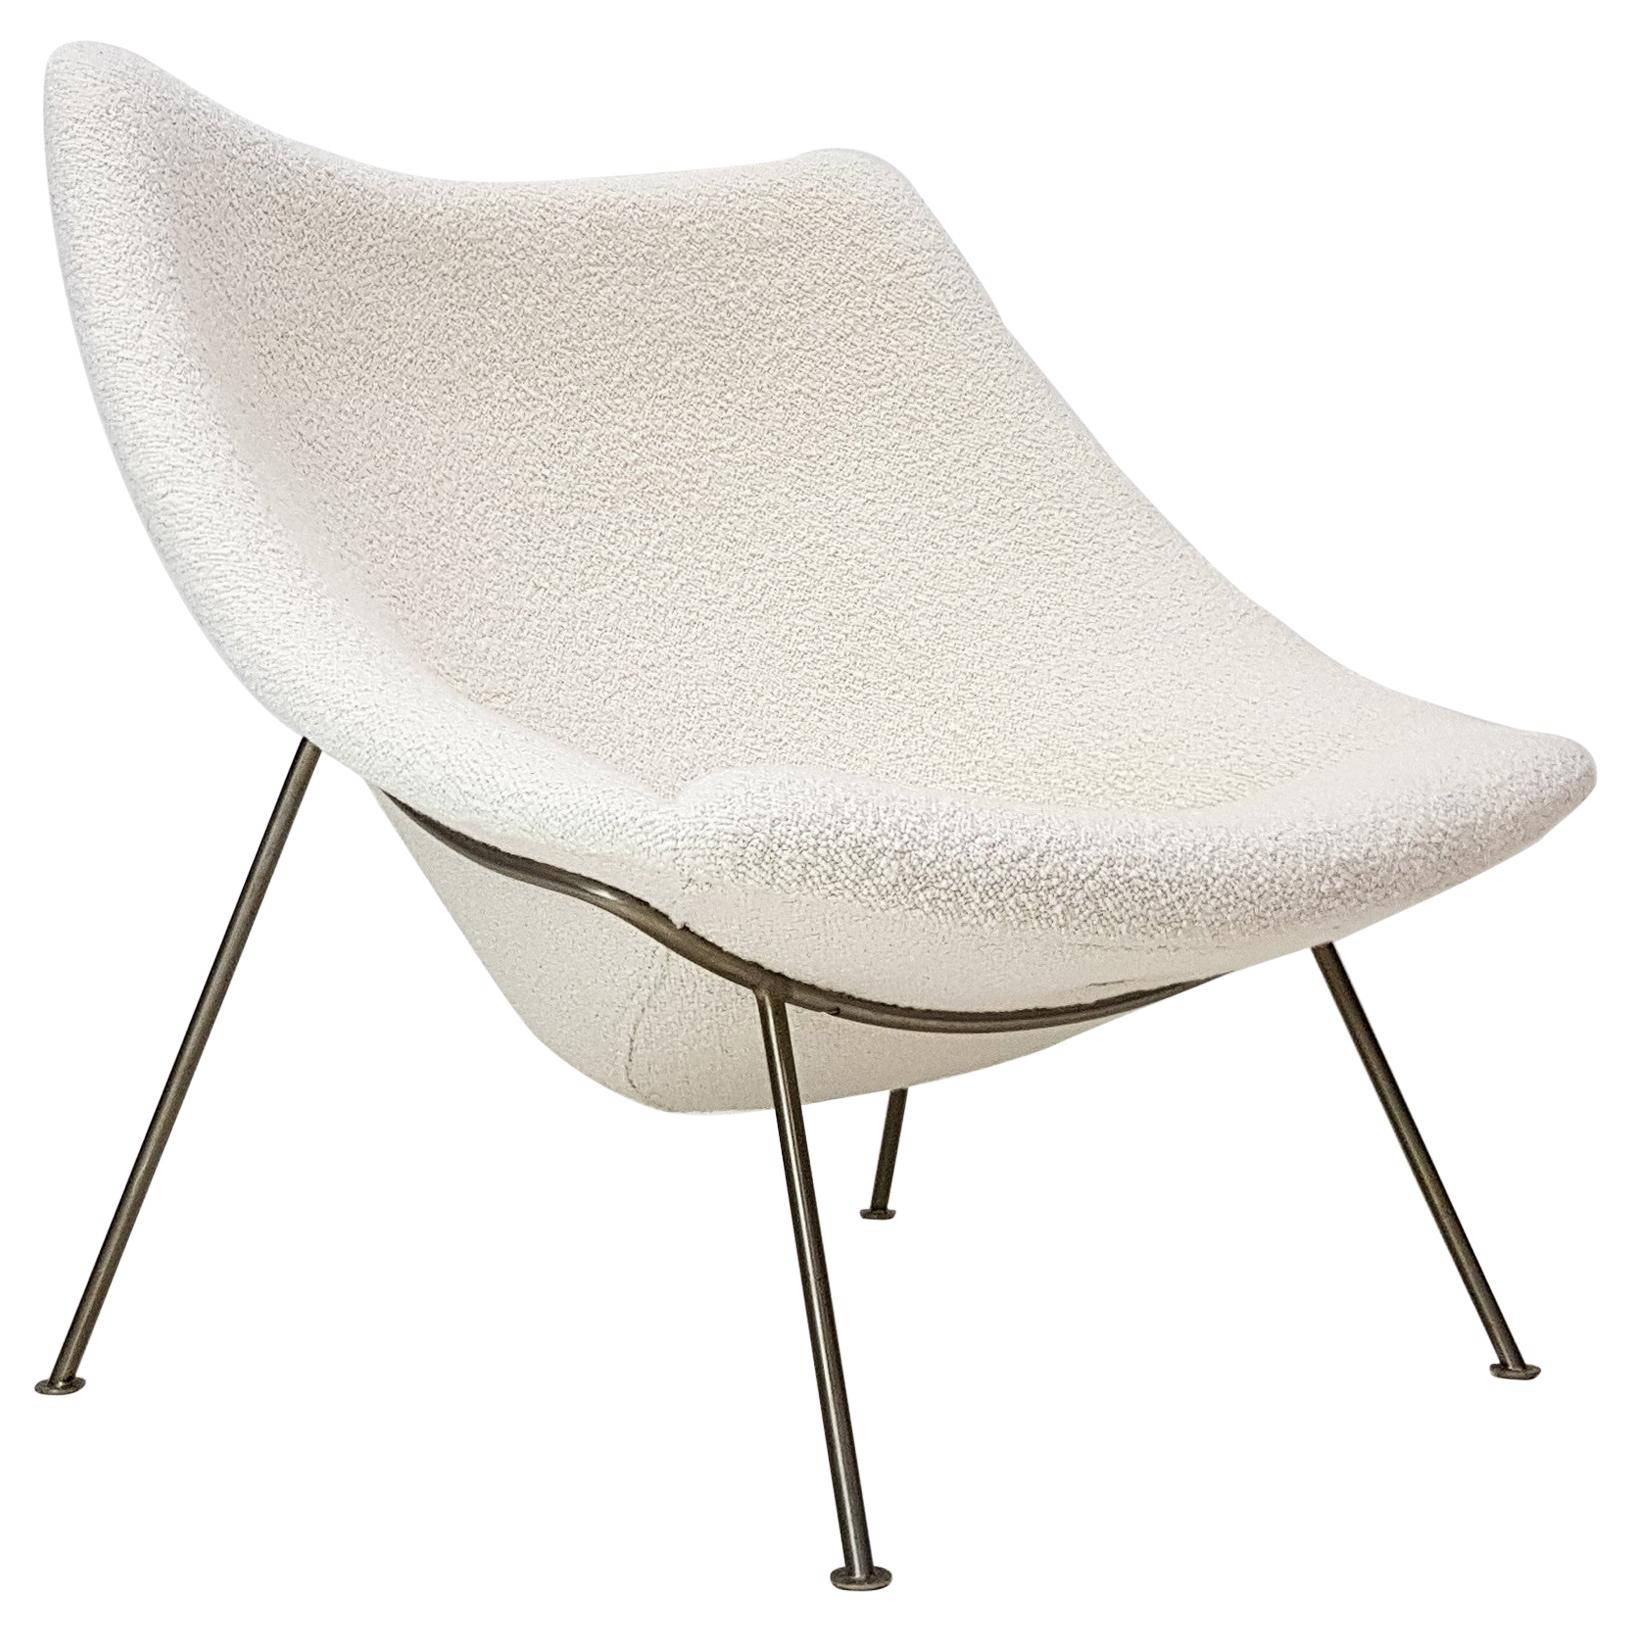 1960s Pierre Paulin Oyster Chair for Artifort in Bouclé Fabric